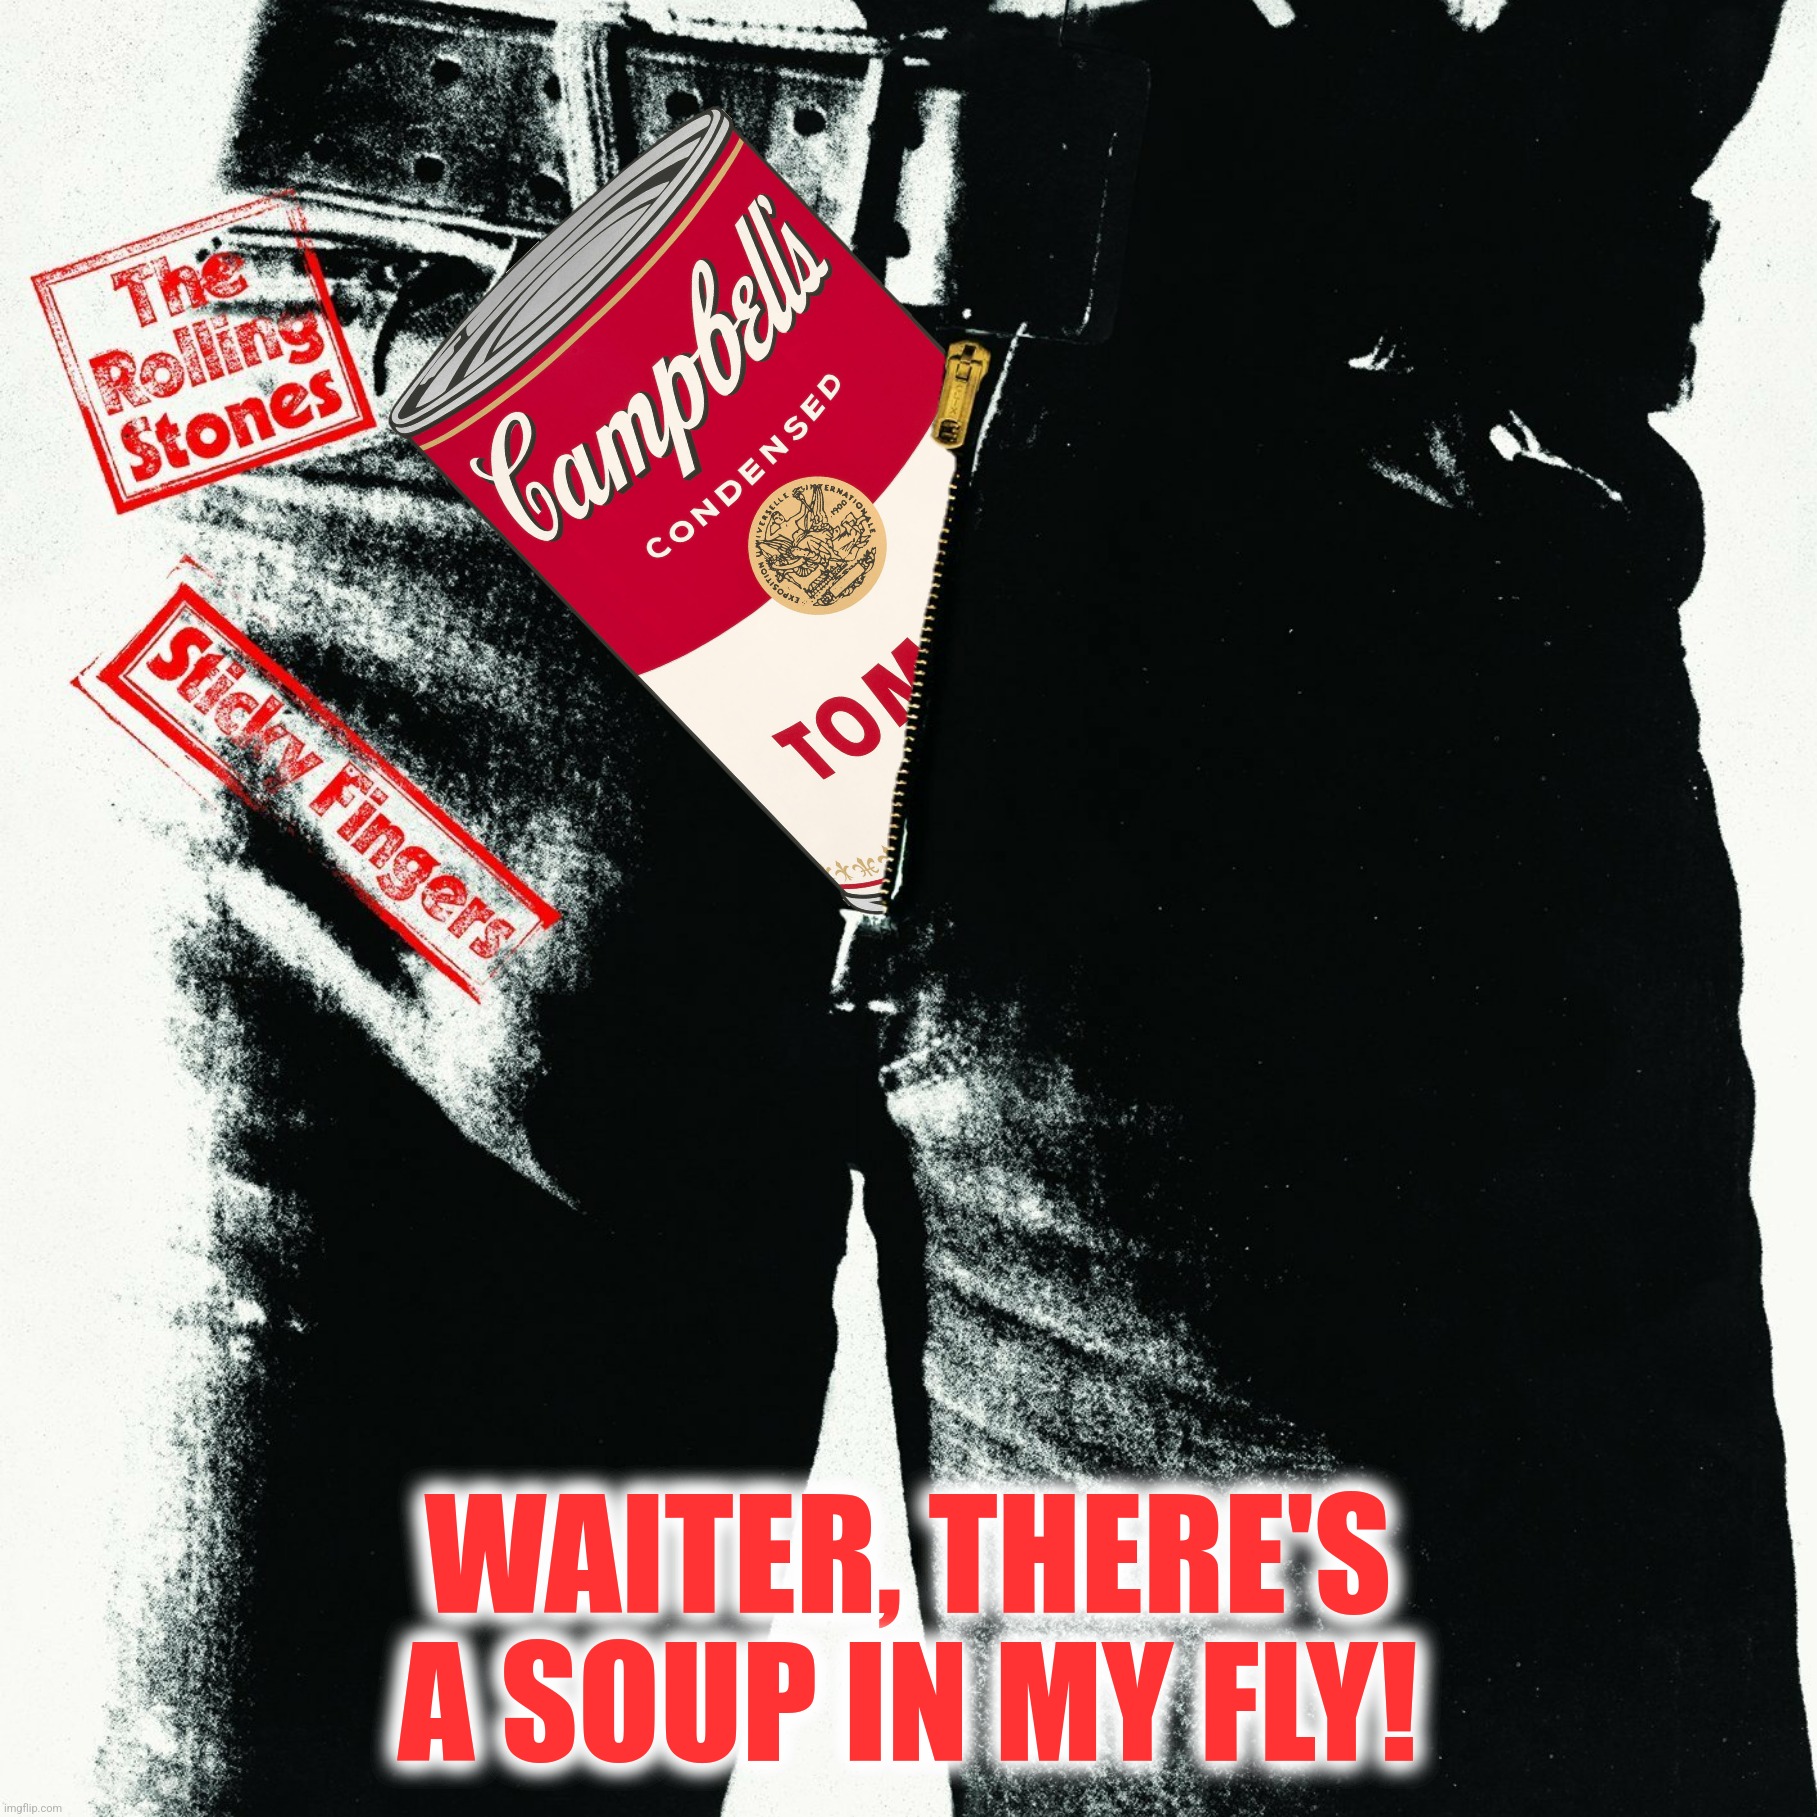 WAITER, THERE'S A SOUP IN MY FLY! | made w/ Imgflip meme maker